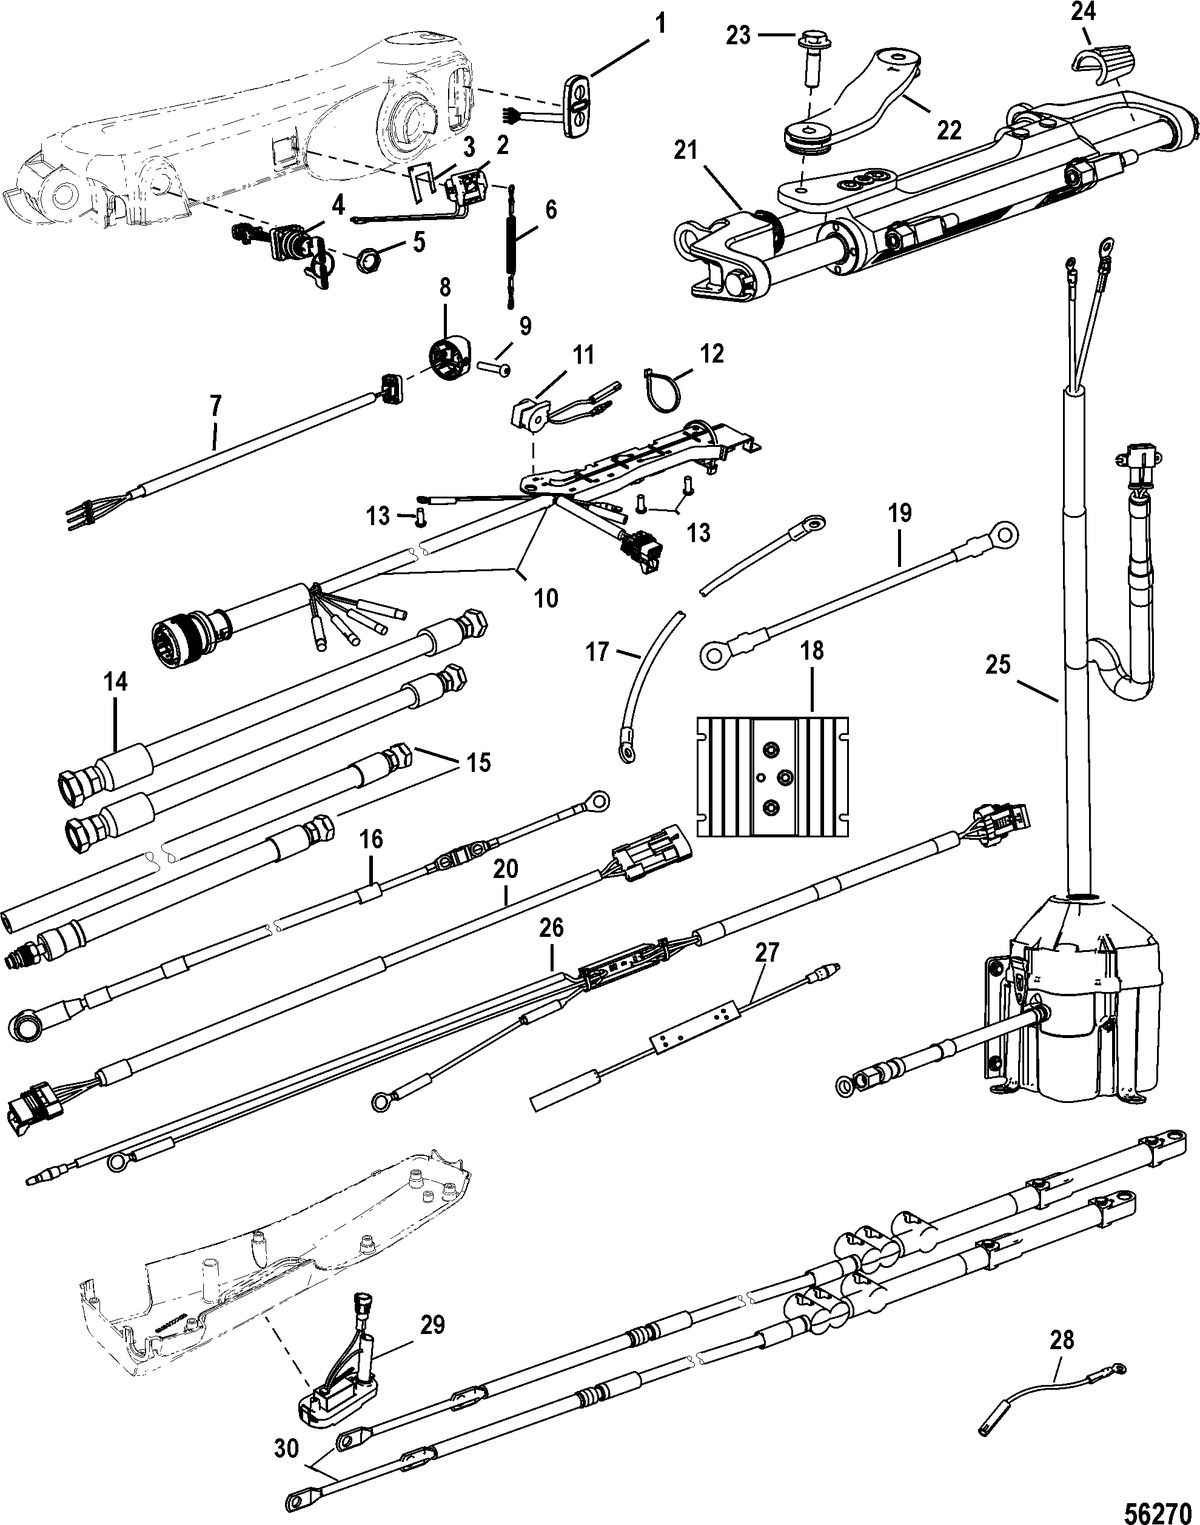 ACCESSORIES STEERING SYSTEMS AND COMPONENTS Tiller Handle Kit Components(Big Tiller-Power Steer,Mech.)